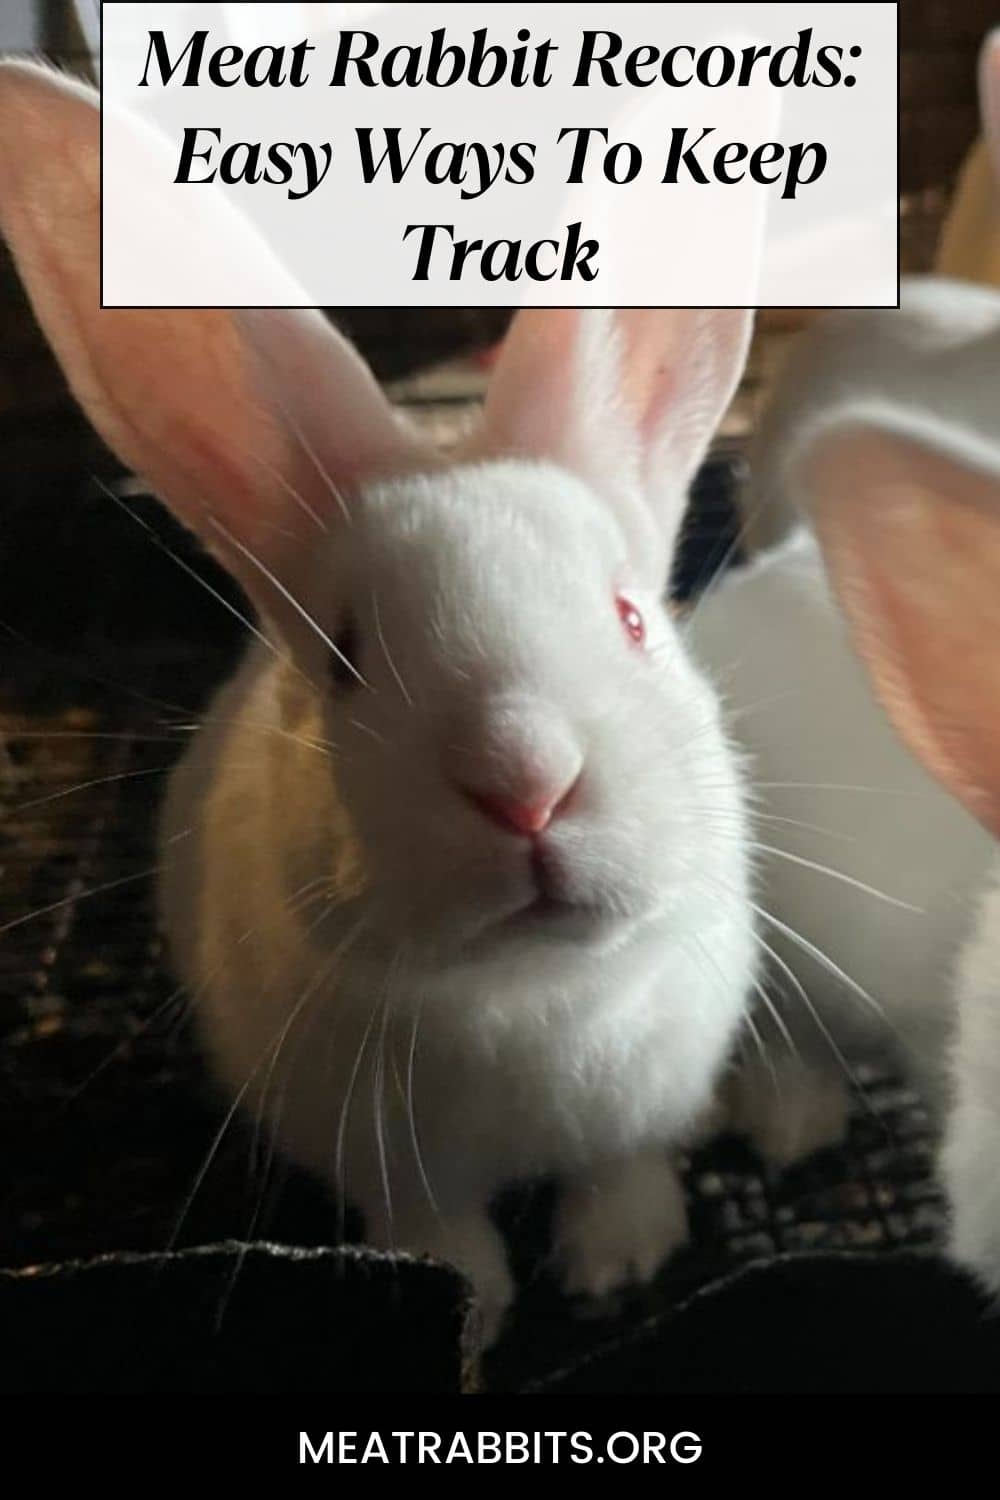 Meat Rabbit Records: Easy Ways To Keep Track pinterest image.